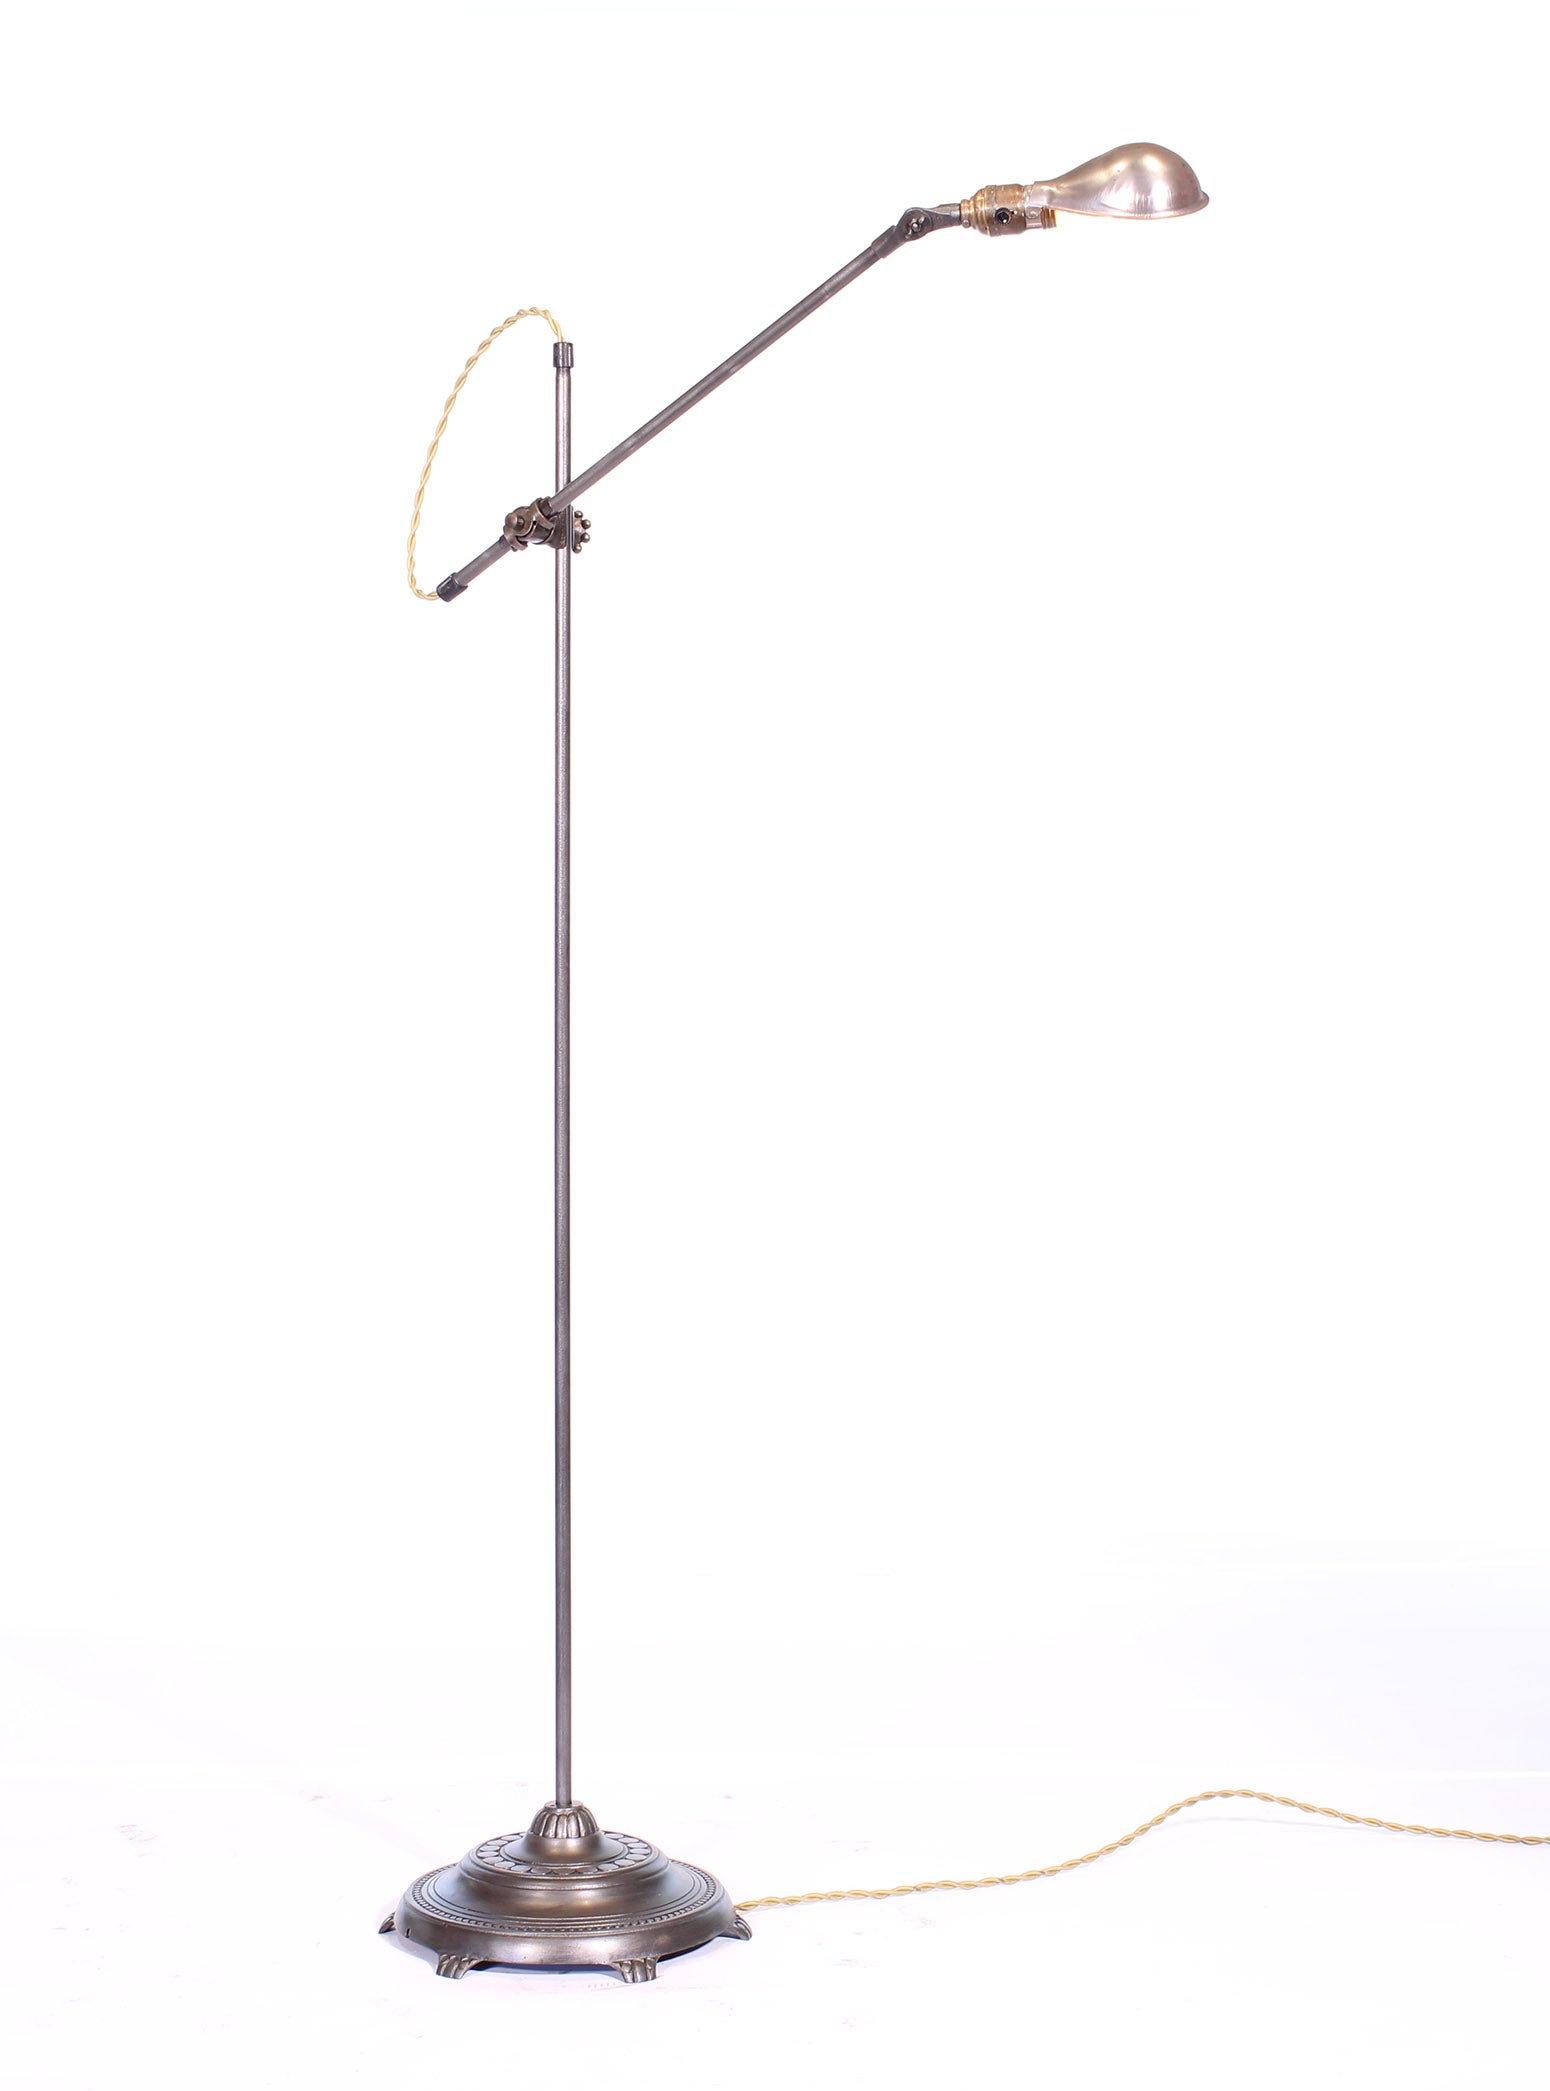 Oc White Adjustable Floor Lamp With Claw Foot Base pertaining to sizing 1550 X 2091